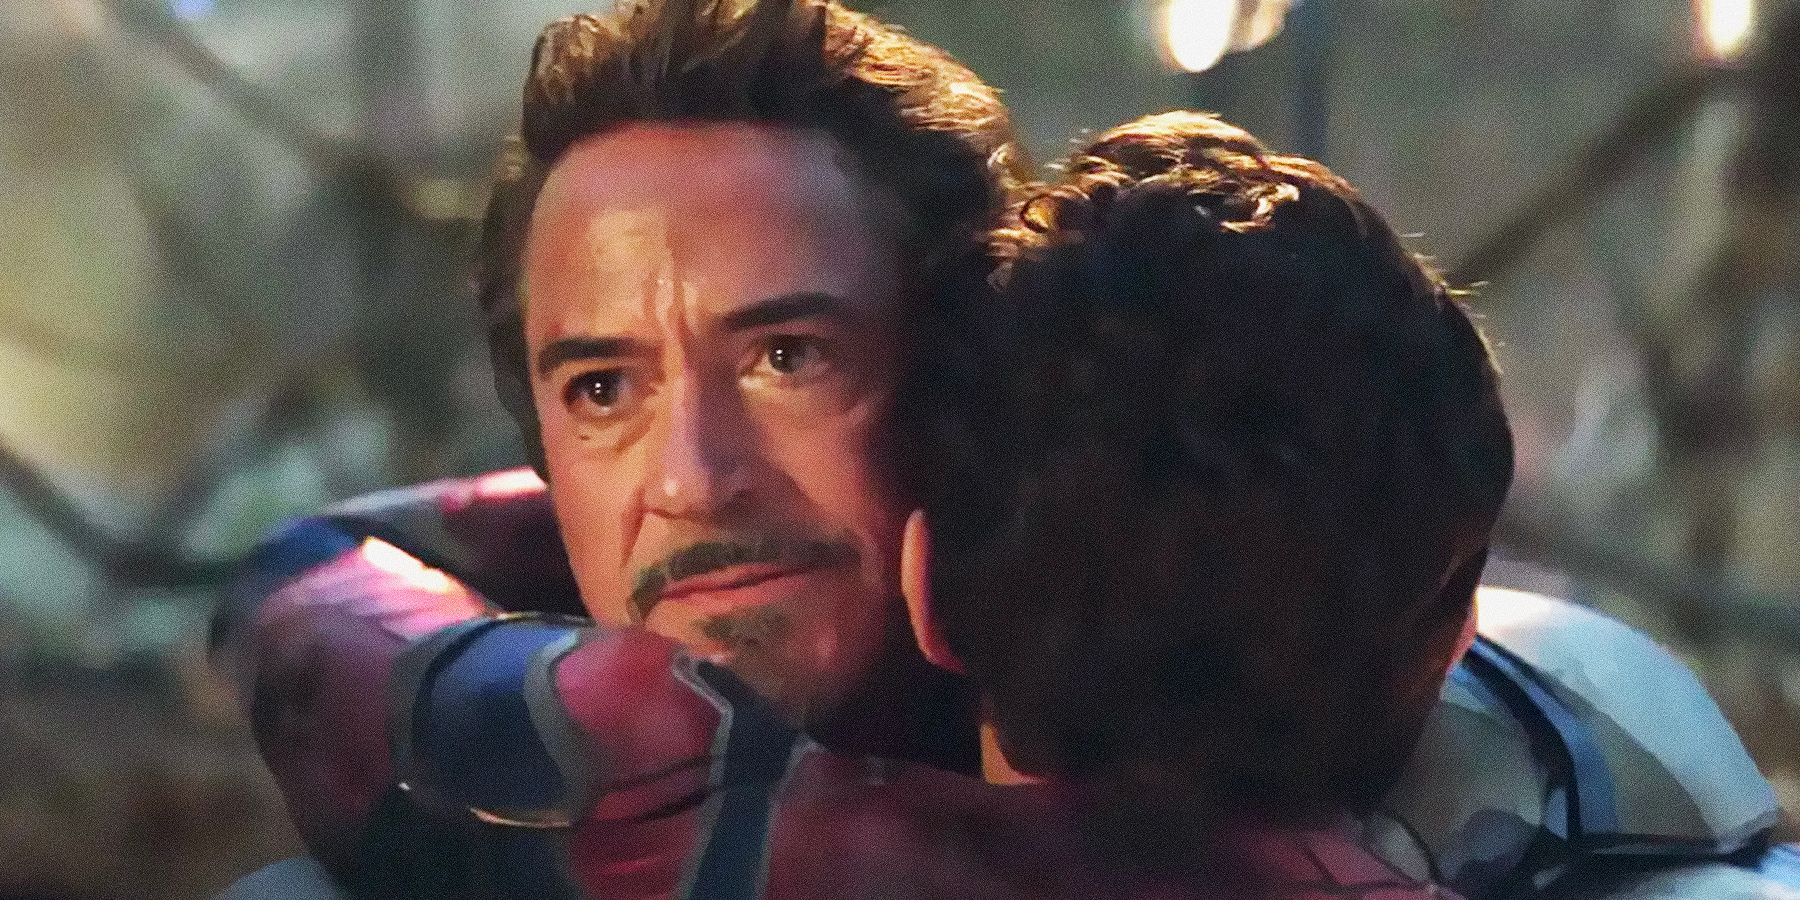 Spider-Man No Way Home writer reveals why Tony Stark wasn't in the